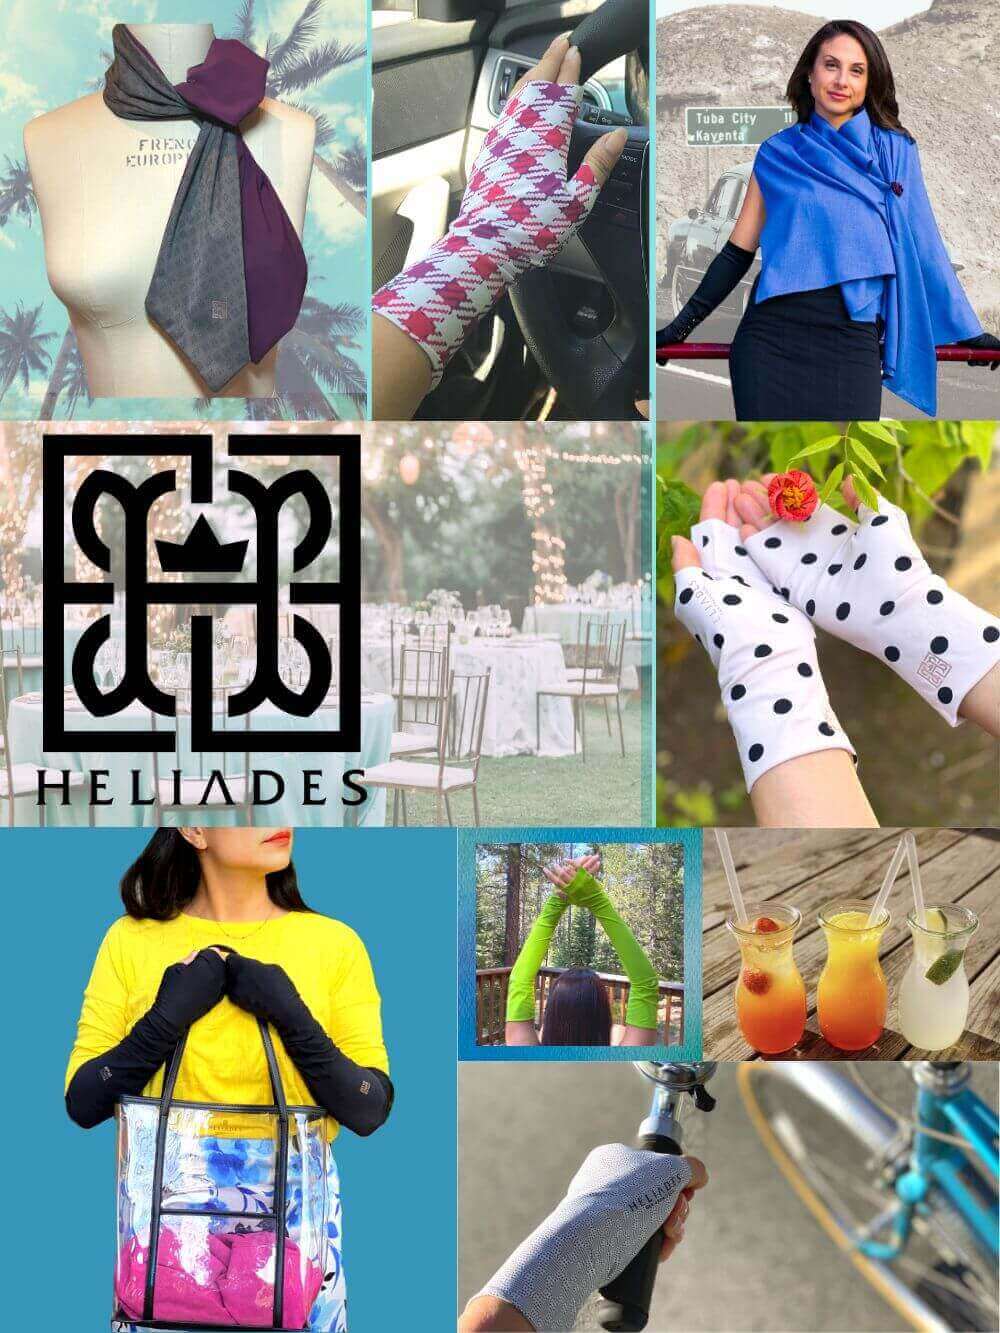 Heliades Stylish UPF 50+ Sun Protection Clothing For Every Day Wear in stylish prints and fun colors.